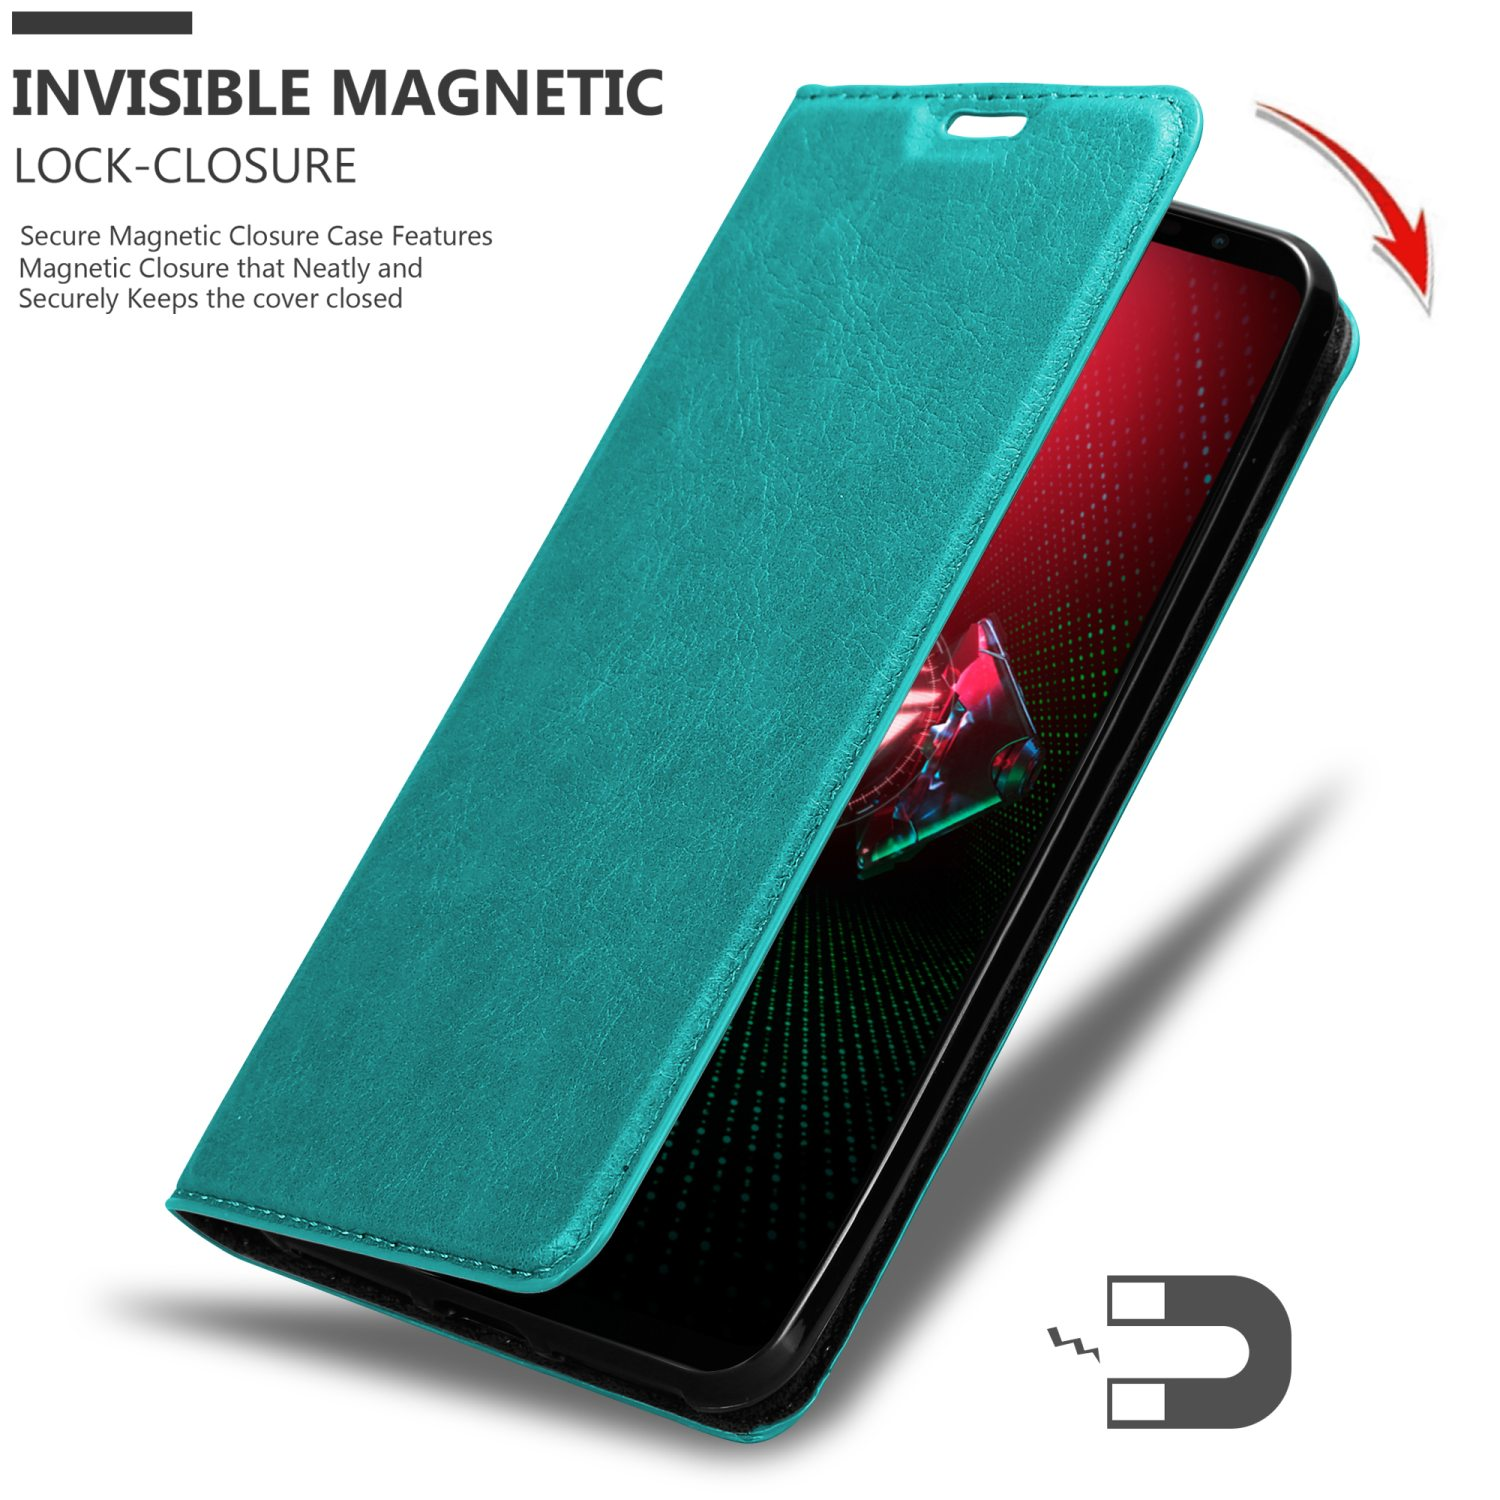 Asus, CADORABO Phone ROG Bookcover, TÜRKIS Book Invisible Magnet, Hülle PETROL 5,